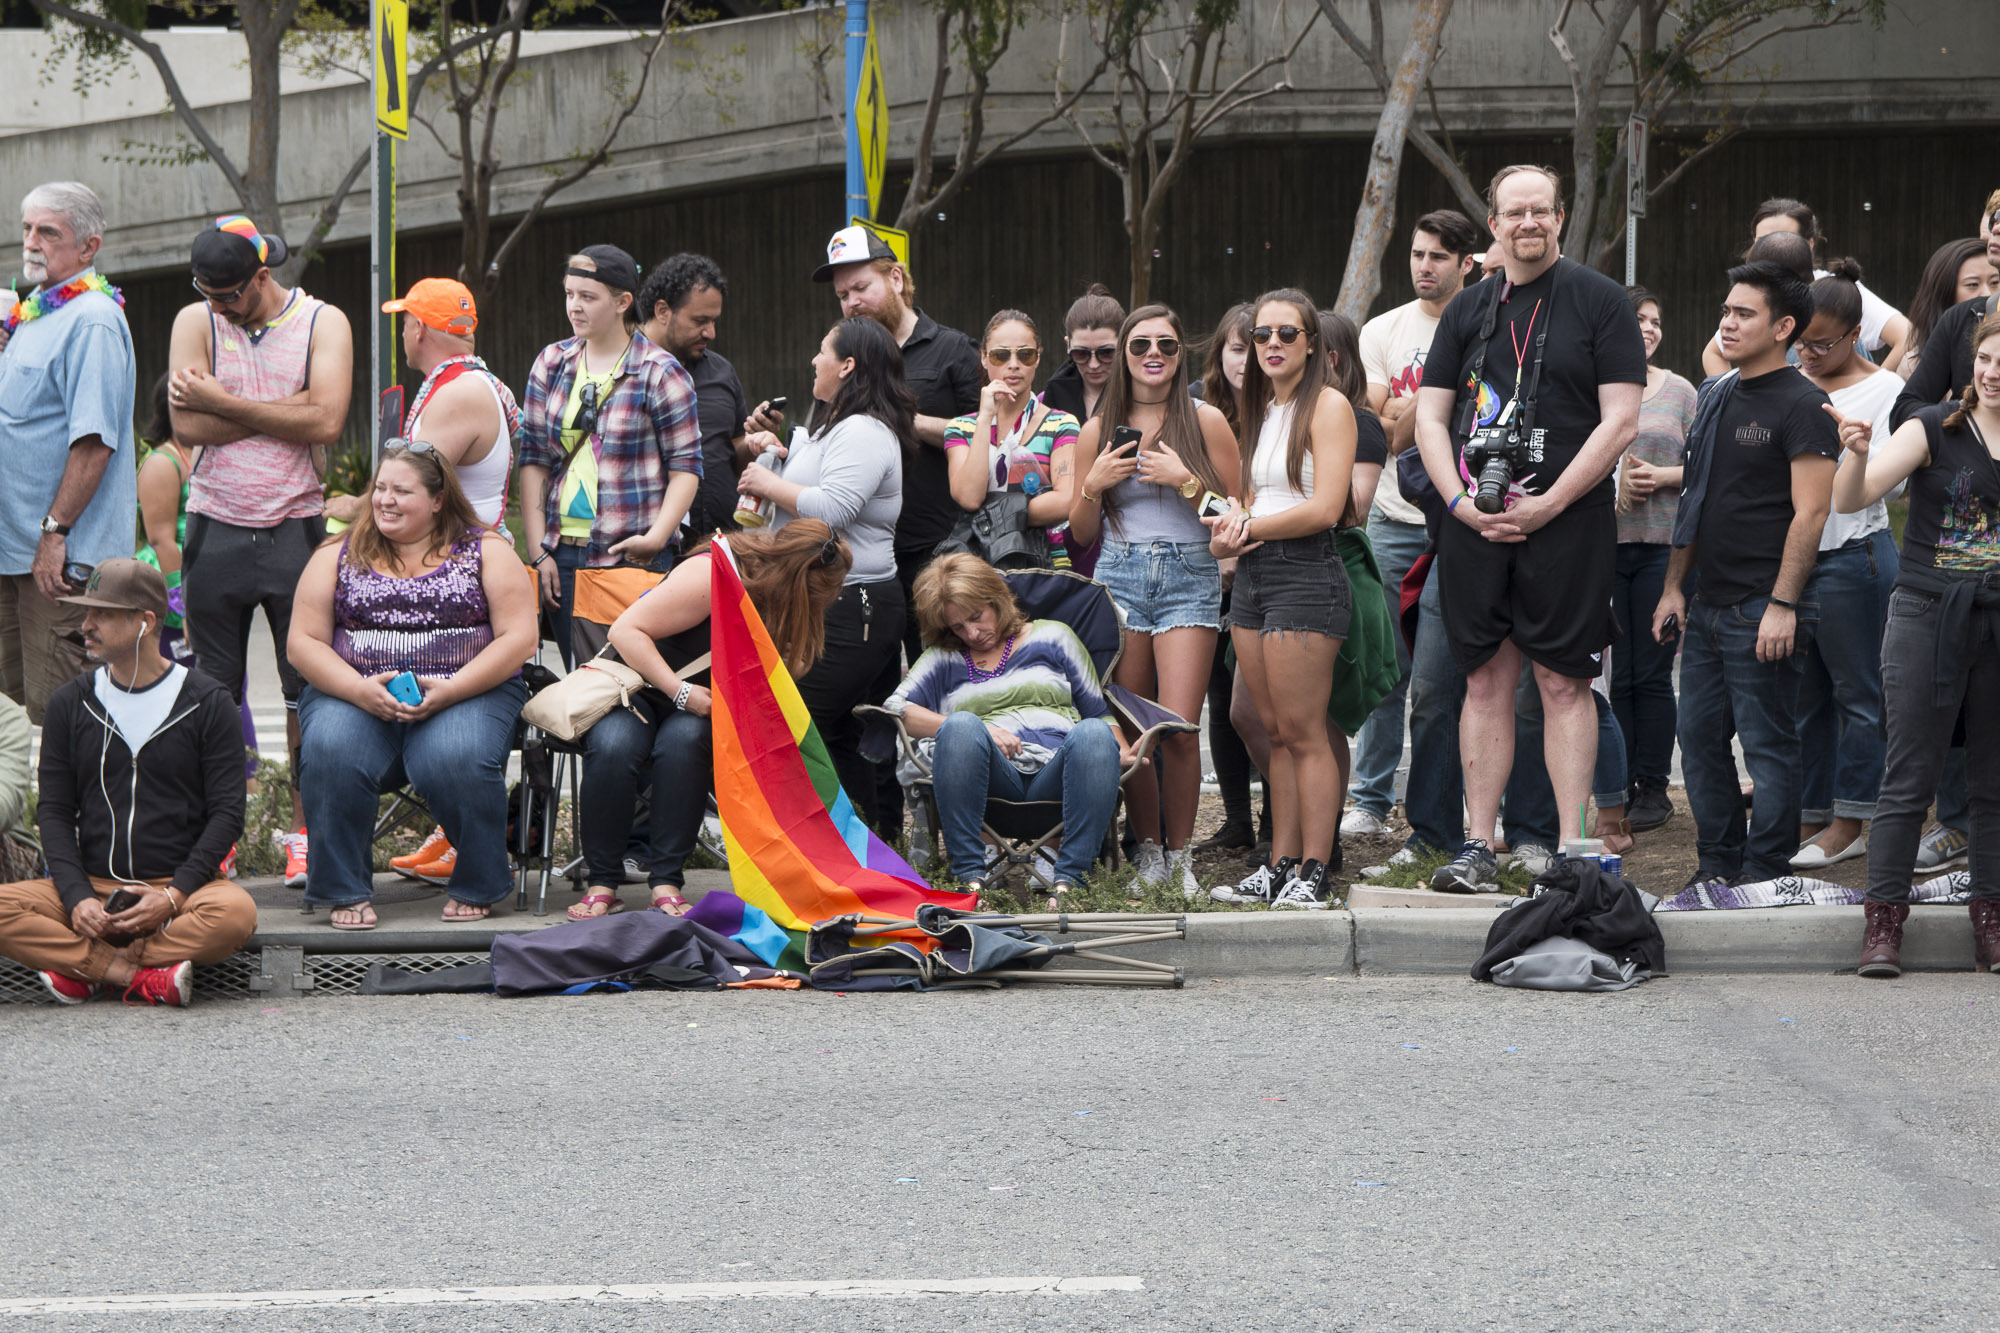 For some it was more fun to sit and watch than march. (Photo by Derek Wear of Unikorn Photography)